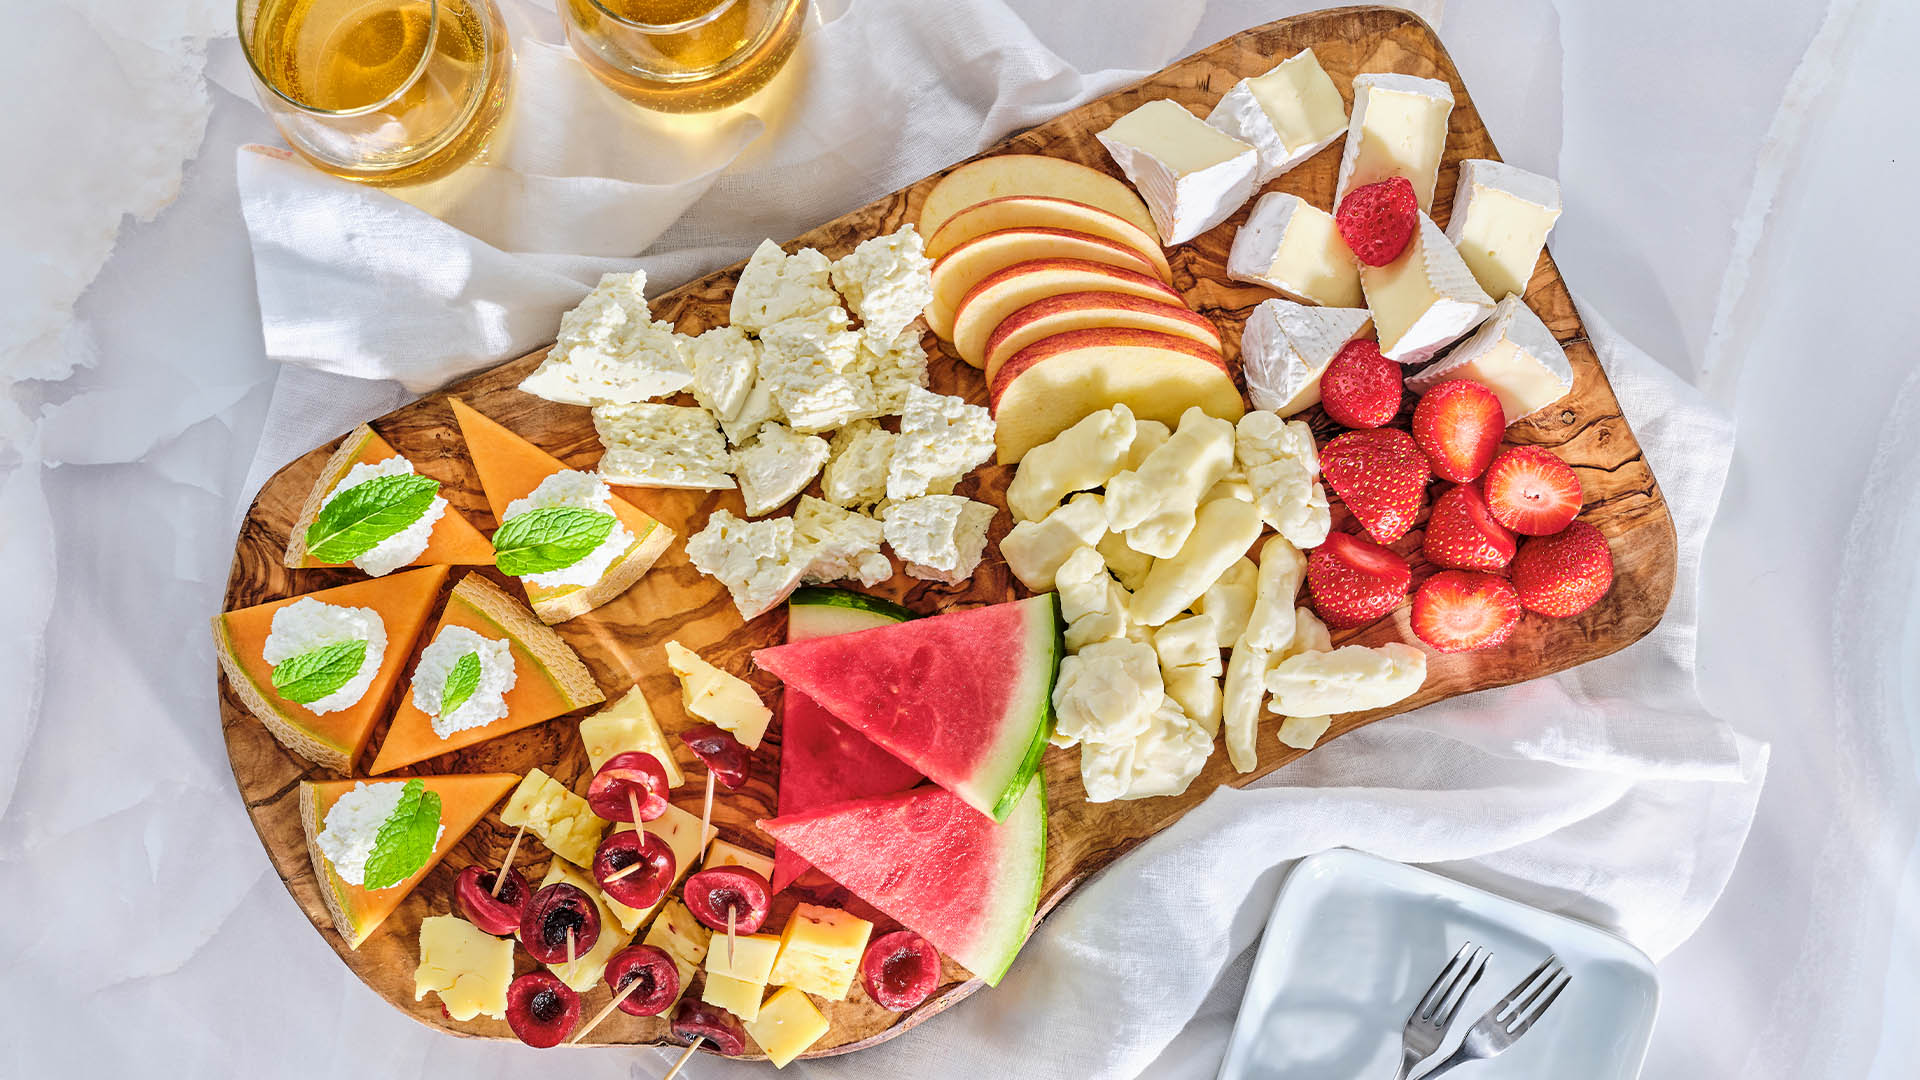 A wooden board on a marble surface containing various types of artisanal cheeses and in season summer fruits.